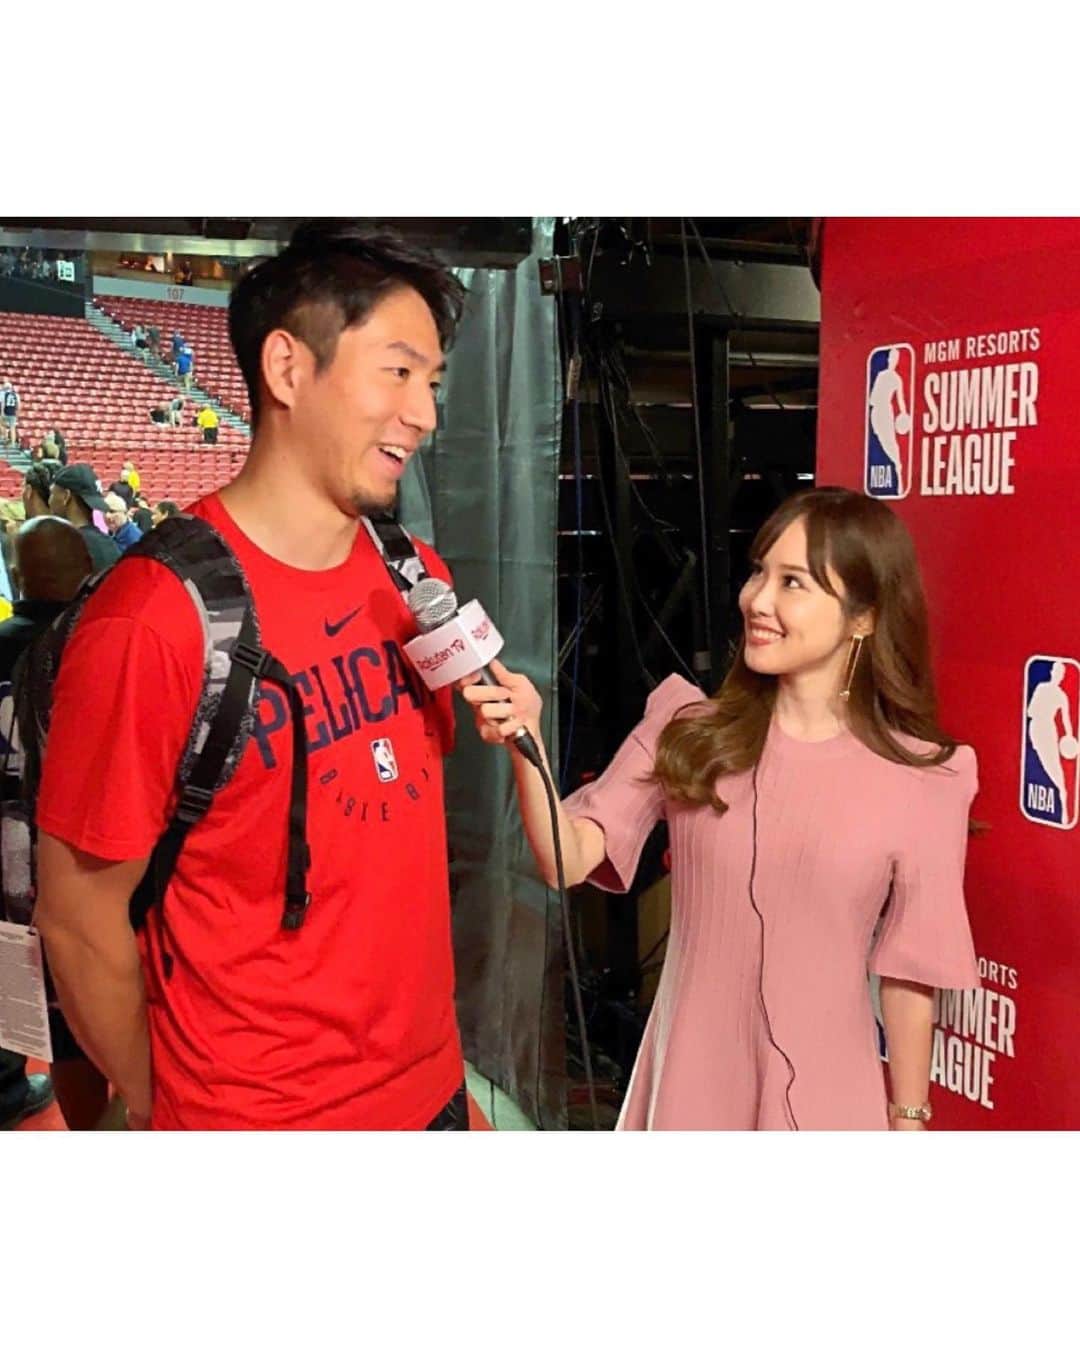 メロディー・モリタさんのインスタグラム写真 - (メロディー・モリタInstagram)「Interviewed Rui Hachimura, the first Japanese NBA player to be drafted in the first round as the 9th pick!!🏀✨ He made his Wizards debut last night with his aggressive defense and alley-oop dunk. I asked him a series of questions from how he felt playing in his first NBA level game, highlight of his night, how he hopes to carry the team as a leader, challenges/obstacles, and much more! I also conducted an exclusive interview with Japanese basketball star Makoto Hiejima! Another historic and touching moment for many Japanese fans (including myself) during last night's game was when both of these Japanese players were on the NBA SL court at the same time.🇯🇵 As a side note... I’ve been reporting pregame, halftime, and postgame, and one interesting moment was when Zion Williamson (#1 draft pick) walked right by me as I was speaking about him on camera.😆 Tonight, I will be covering Yuta Watanabe for the second consecutive year. Please continue to support and share about these amazing Japanese players!!☺️ Stay tuned on RakutenTV and my social media!🙌 * 昨日の試合直後に、今世界中が注目する日本人初 NBAドラフト１巡目（９位）に指名された「#八村塁 選手」にたっぷりインタビューをさせて頂きました‼️✨✨ 初めてウィザーズのユニフォームを着て、力強いディフェンスやアリウープダンクでNBAデビューを飾った八村選手。NBAレベルを体感した感想、ご自身のパフォーマンス、ウィザーズの中心になると宣言した想い、今後の課題や実践したいプレーなど、沢山の質問に答えて下さいました。  又この試合では、先日単独インタビューさせていただいた日本を代表するバスケ選手「#比江島慎 選手」と、同じコートに2人の日本人が同時に立つという偉業も成し遂げられました。NBAの舞台の一つであるサマーリーグで日本人対決が観られた瞬間には、本当に胸がいっぱいになりました。  楽天TVでの生中継リポート中（6枚目の写真）に、ドラフト指名１位の ザイオン・ウィリアムソン選手について語っている時には、ちょうどご本人が真横を通り過ぎて行くなど、色々なハプニングも有りで... 今後もいち早く現地の状況をお届けして参ります！💡 今日はこれから、去年のサマーリーグでも密着取材した渡邊雄太選手の試合＆取材に行ってきます！これからの試合の日本人選手達の活躍を「楽天TVスペシャル」で一緒に応援していただけると嬉しいです！🏀🔥 #NBA #八村塁 #比江島慎 #RuiHachimura #MakotoHiejima #ZionWilliamson」7月8日 5時58分 - melodeemorita